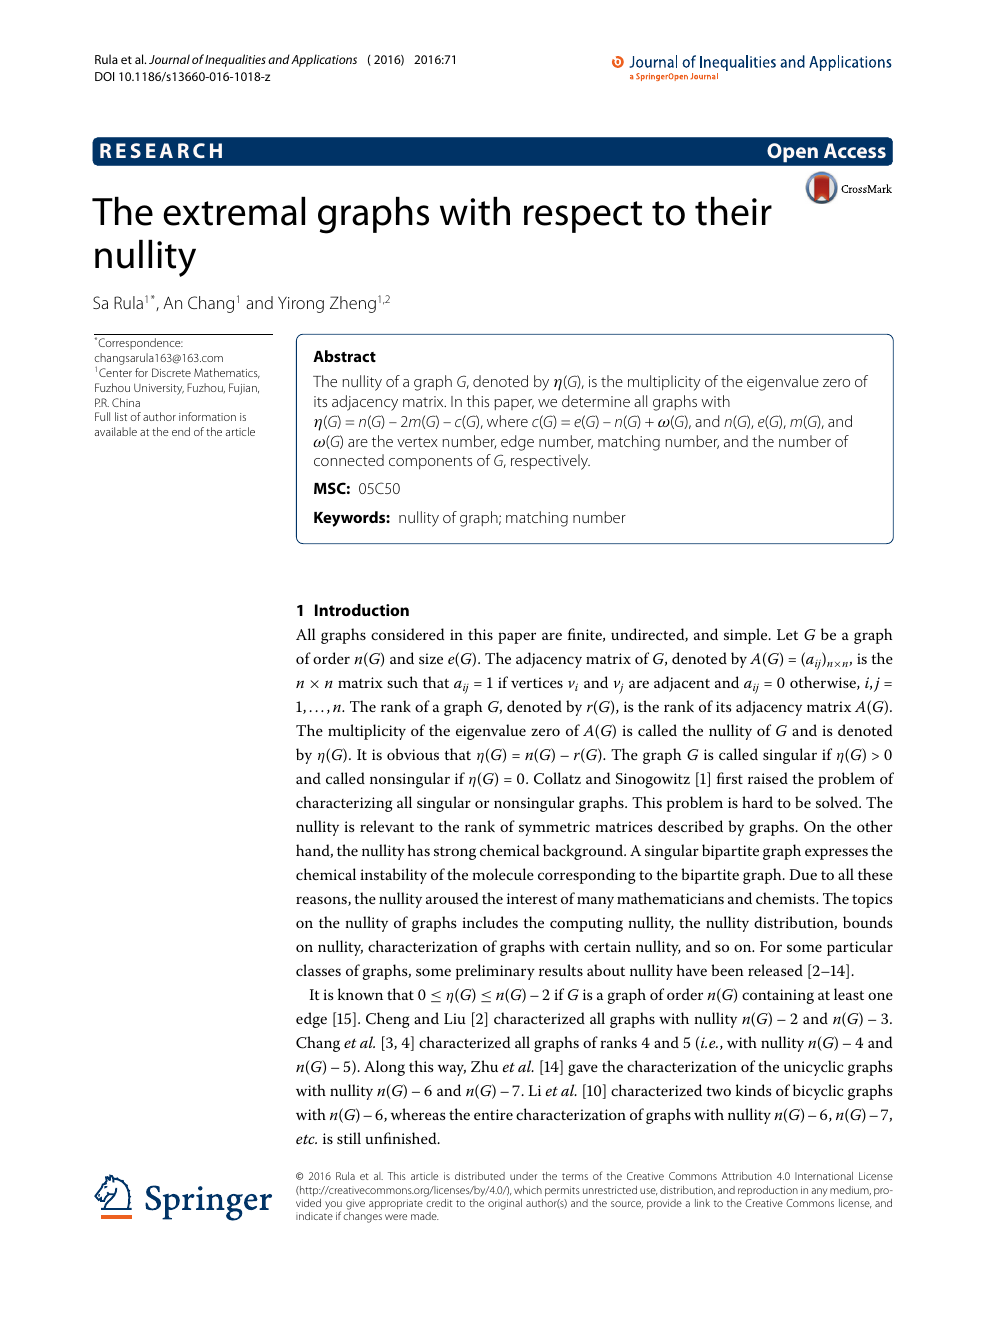 The Extremal Graphs With Respect To Their Nullity Topic Of Research Paper In Mathematics Download Scholarly Article Pdf And Read For Free On Cyberleninka Open Science Hub